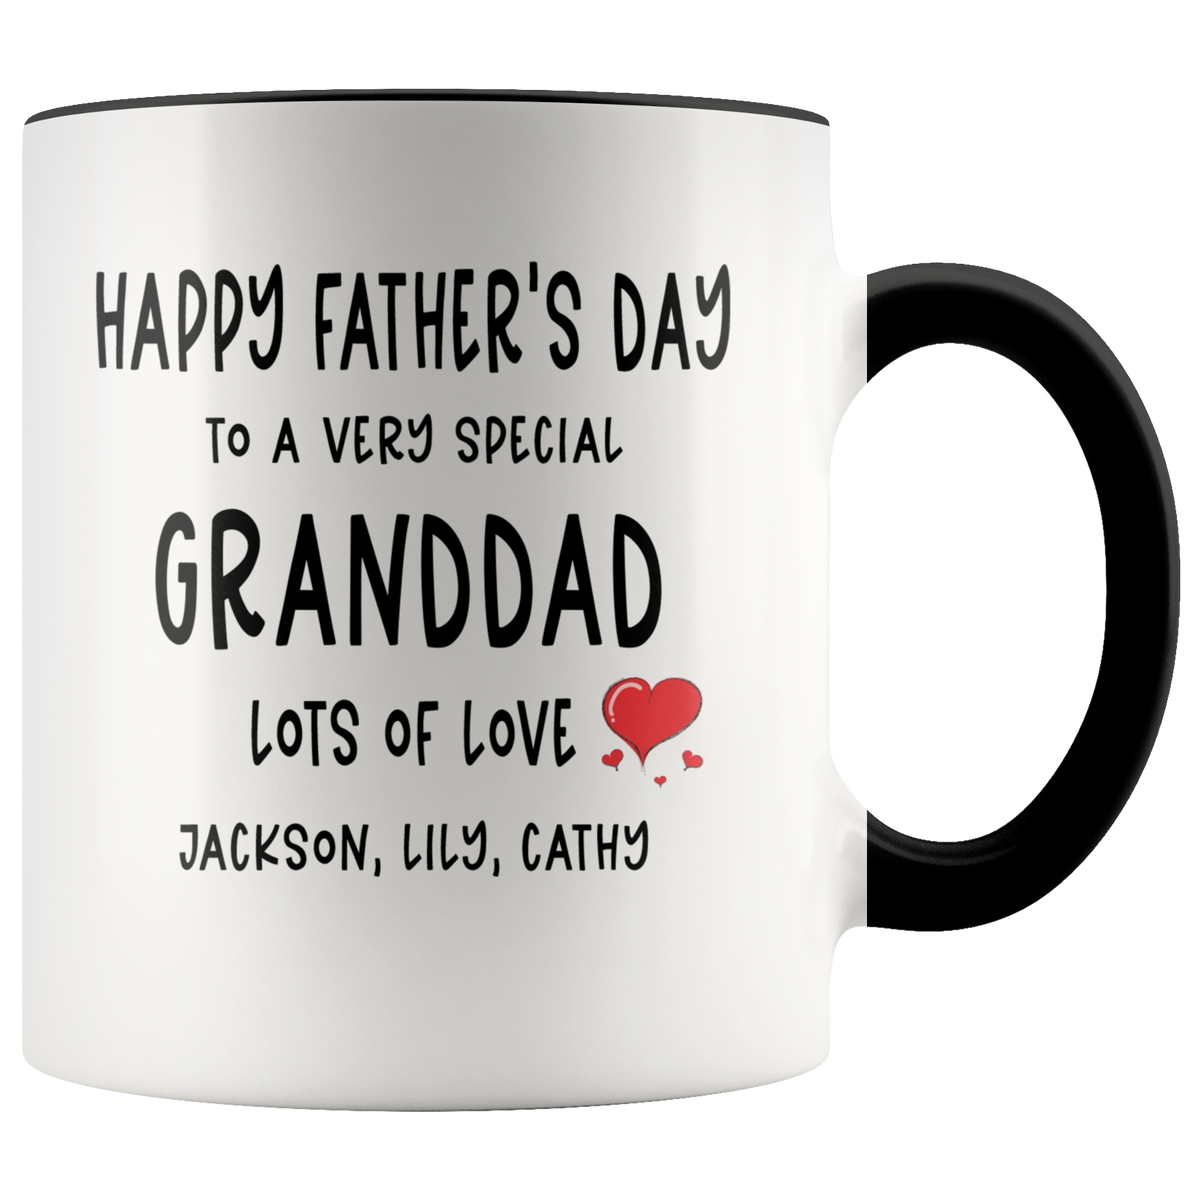 Personalized Fathers Day Mug For Granddad, Dad, Uncle, Stepdad - Happy Fathers Day To A Very Special Granddad Accent Coffee Mug 11oz (black)